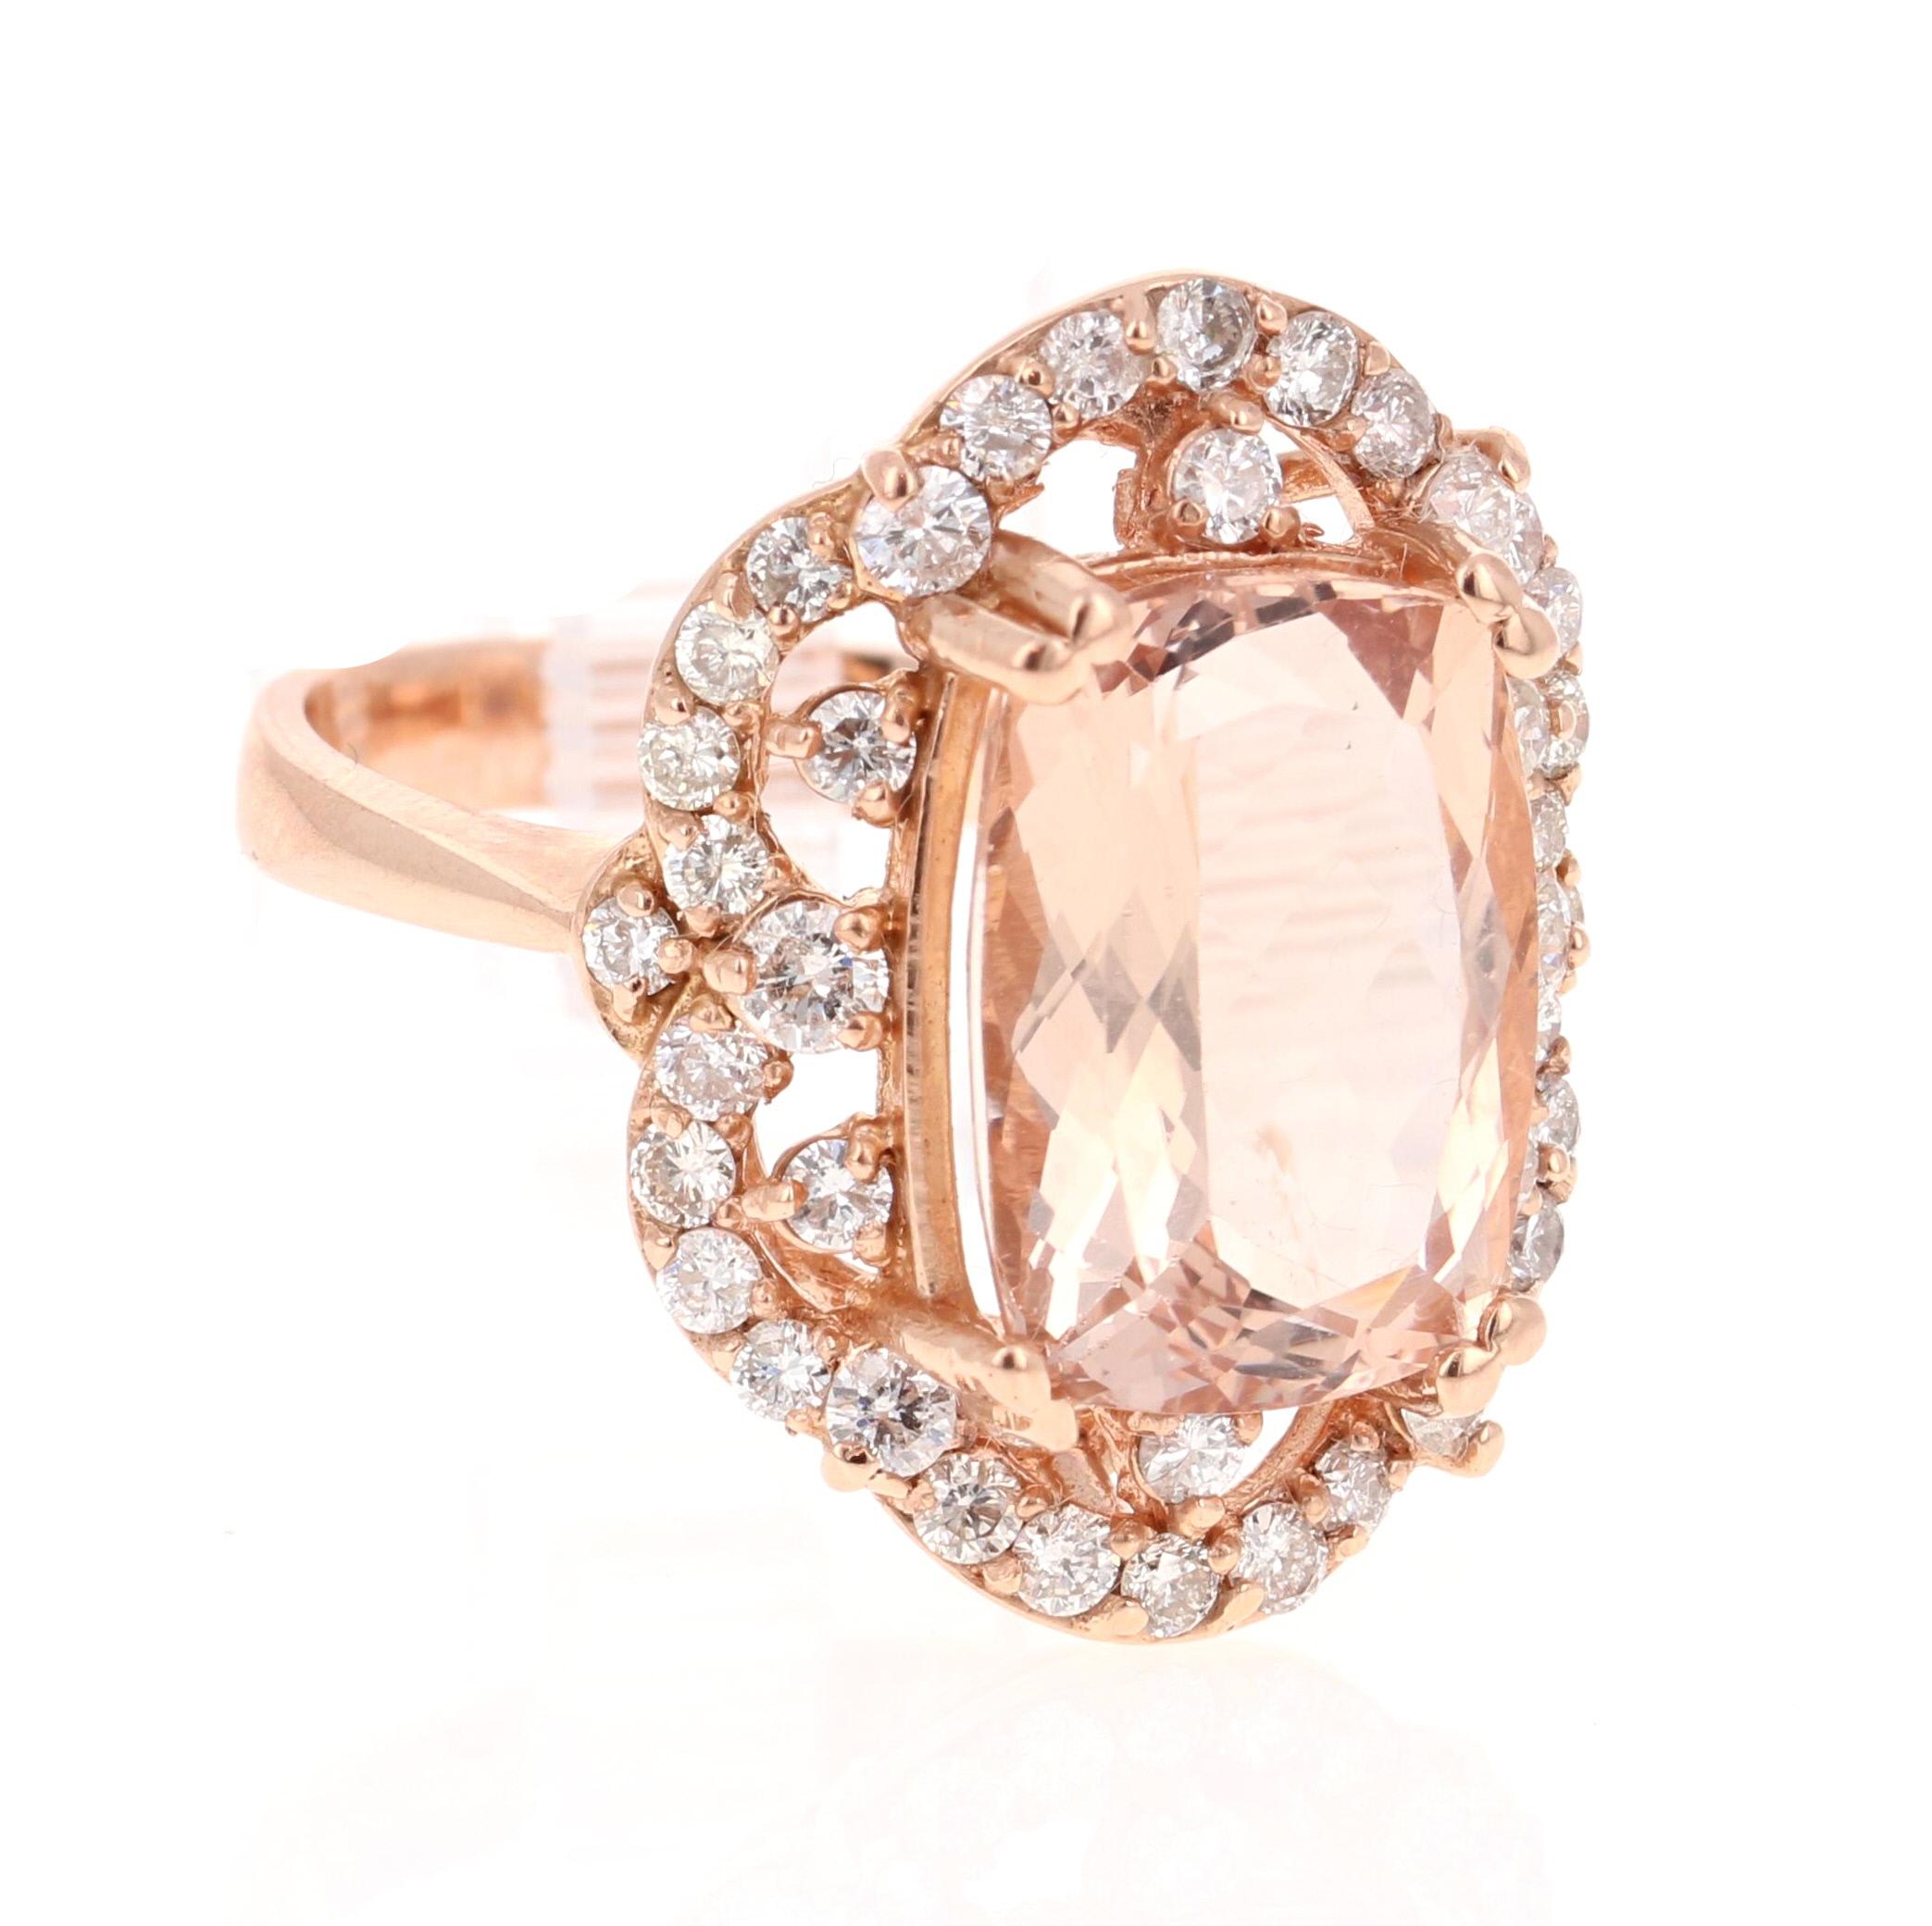 This Morganite ring has a beautiful 6.07 Carat Oval-Cushion Cut Morganite and is surrounded by 40 Round Cut Diamonds that weigh 1.06 Carats. The total carat weight of the ring is 7.13 Carats. 

The measurements of the Morganite are 10 mm x 14 mm and